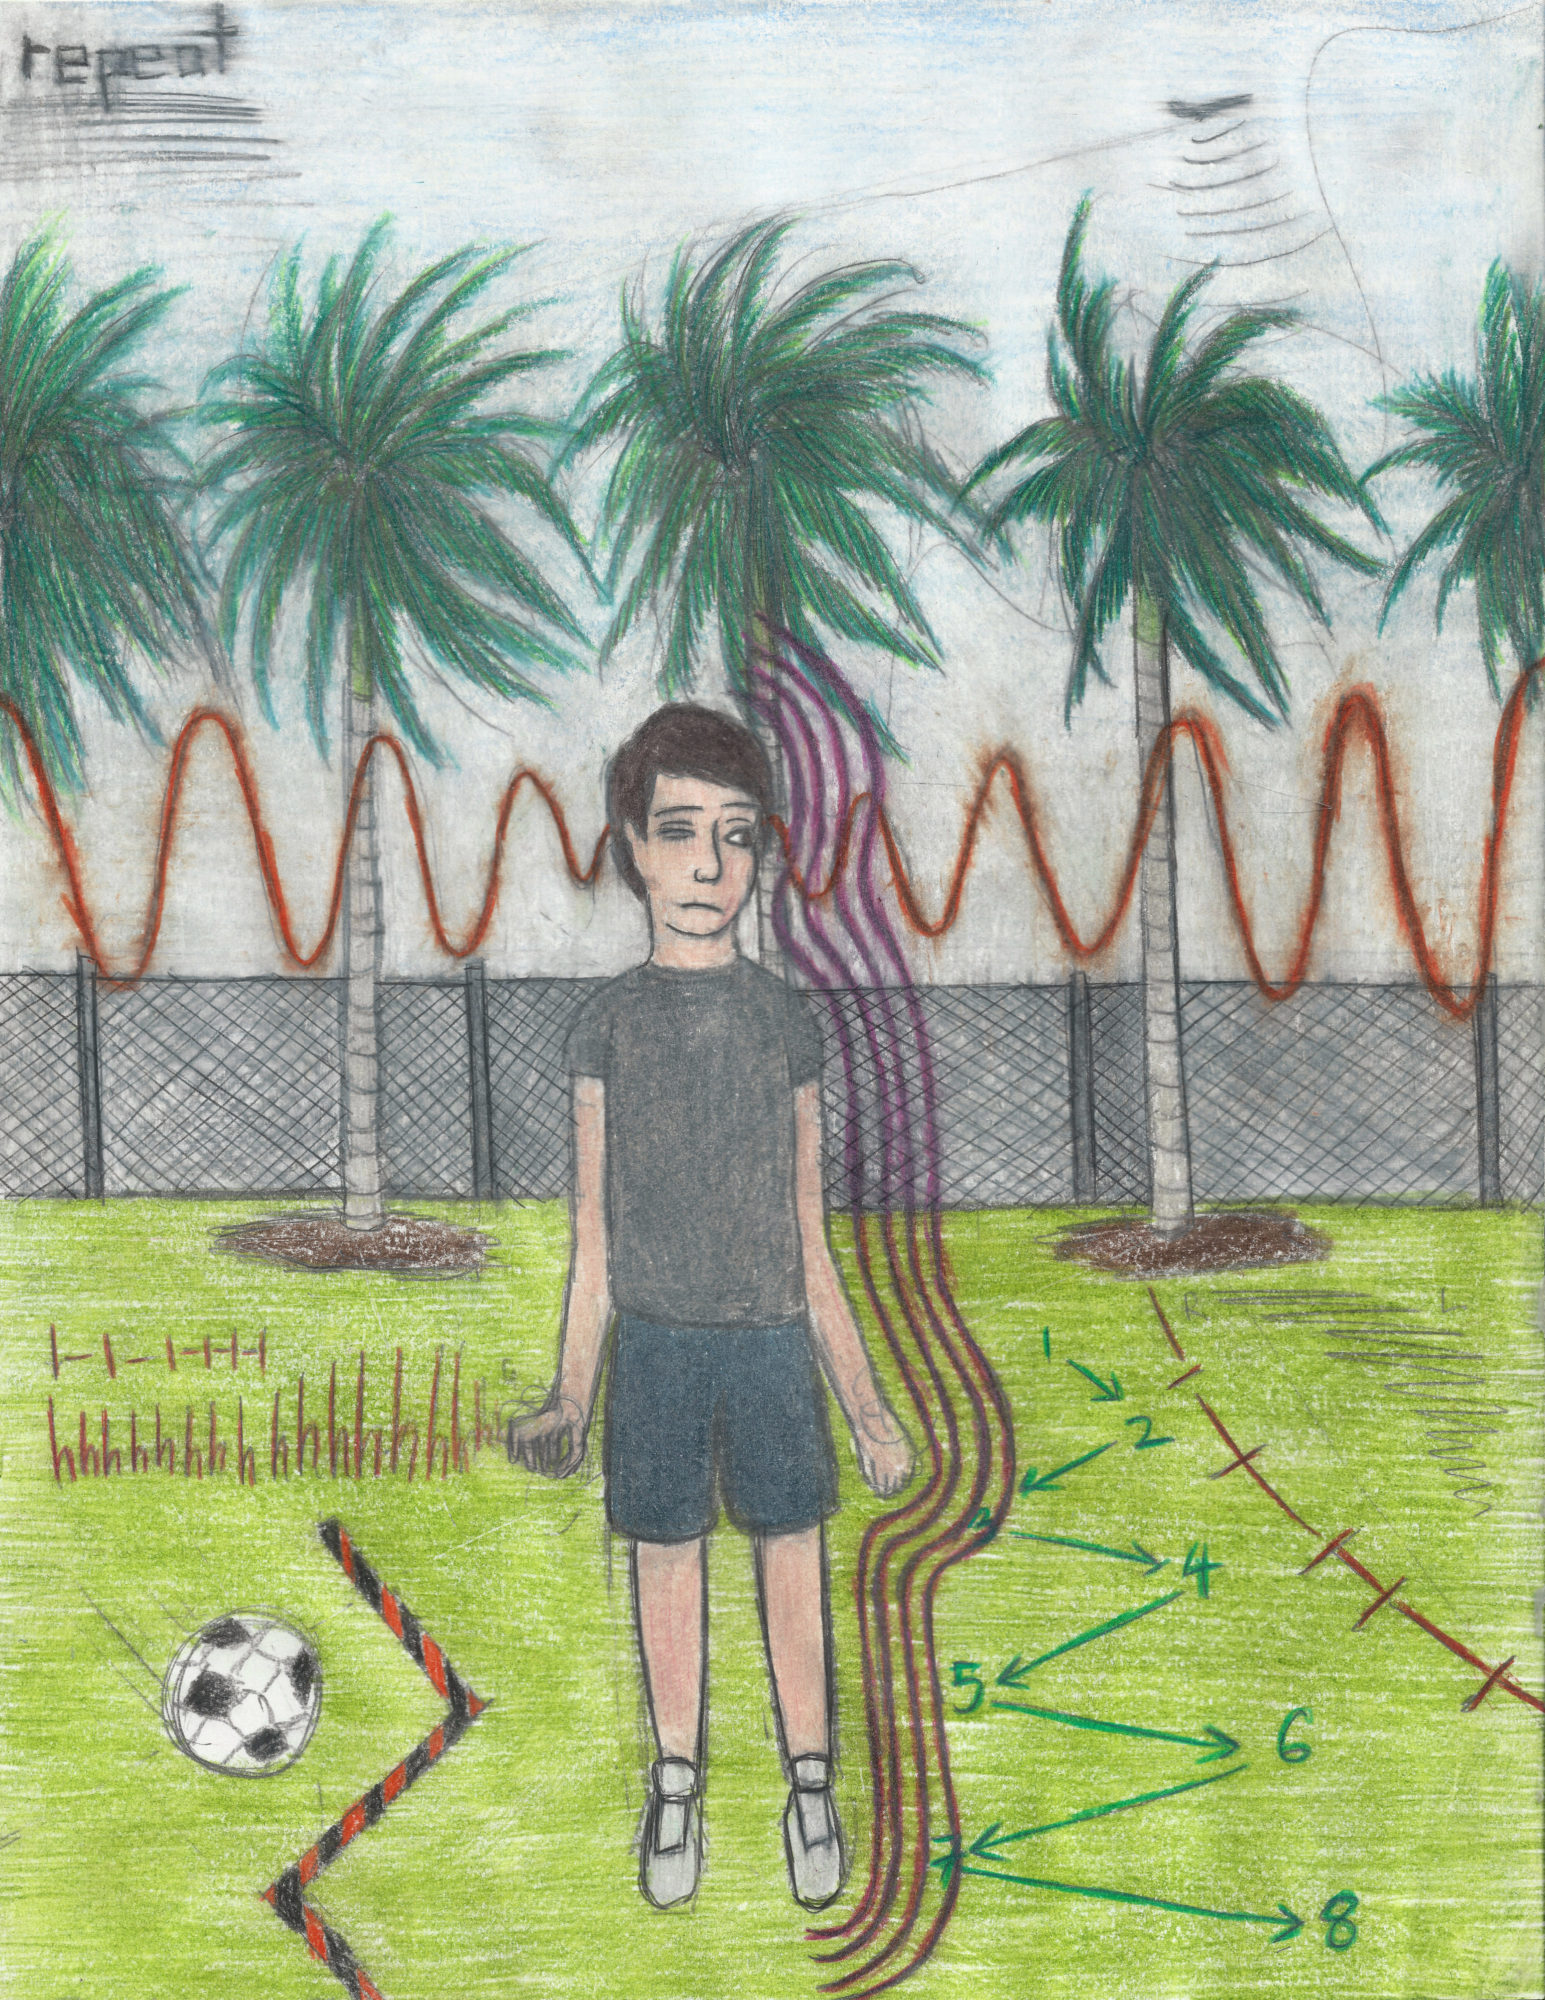 color drawing of a boy standing on a field with palm trees in background